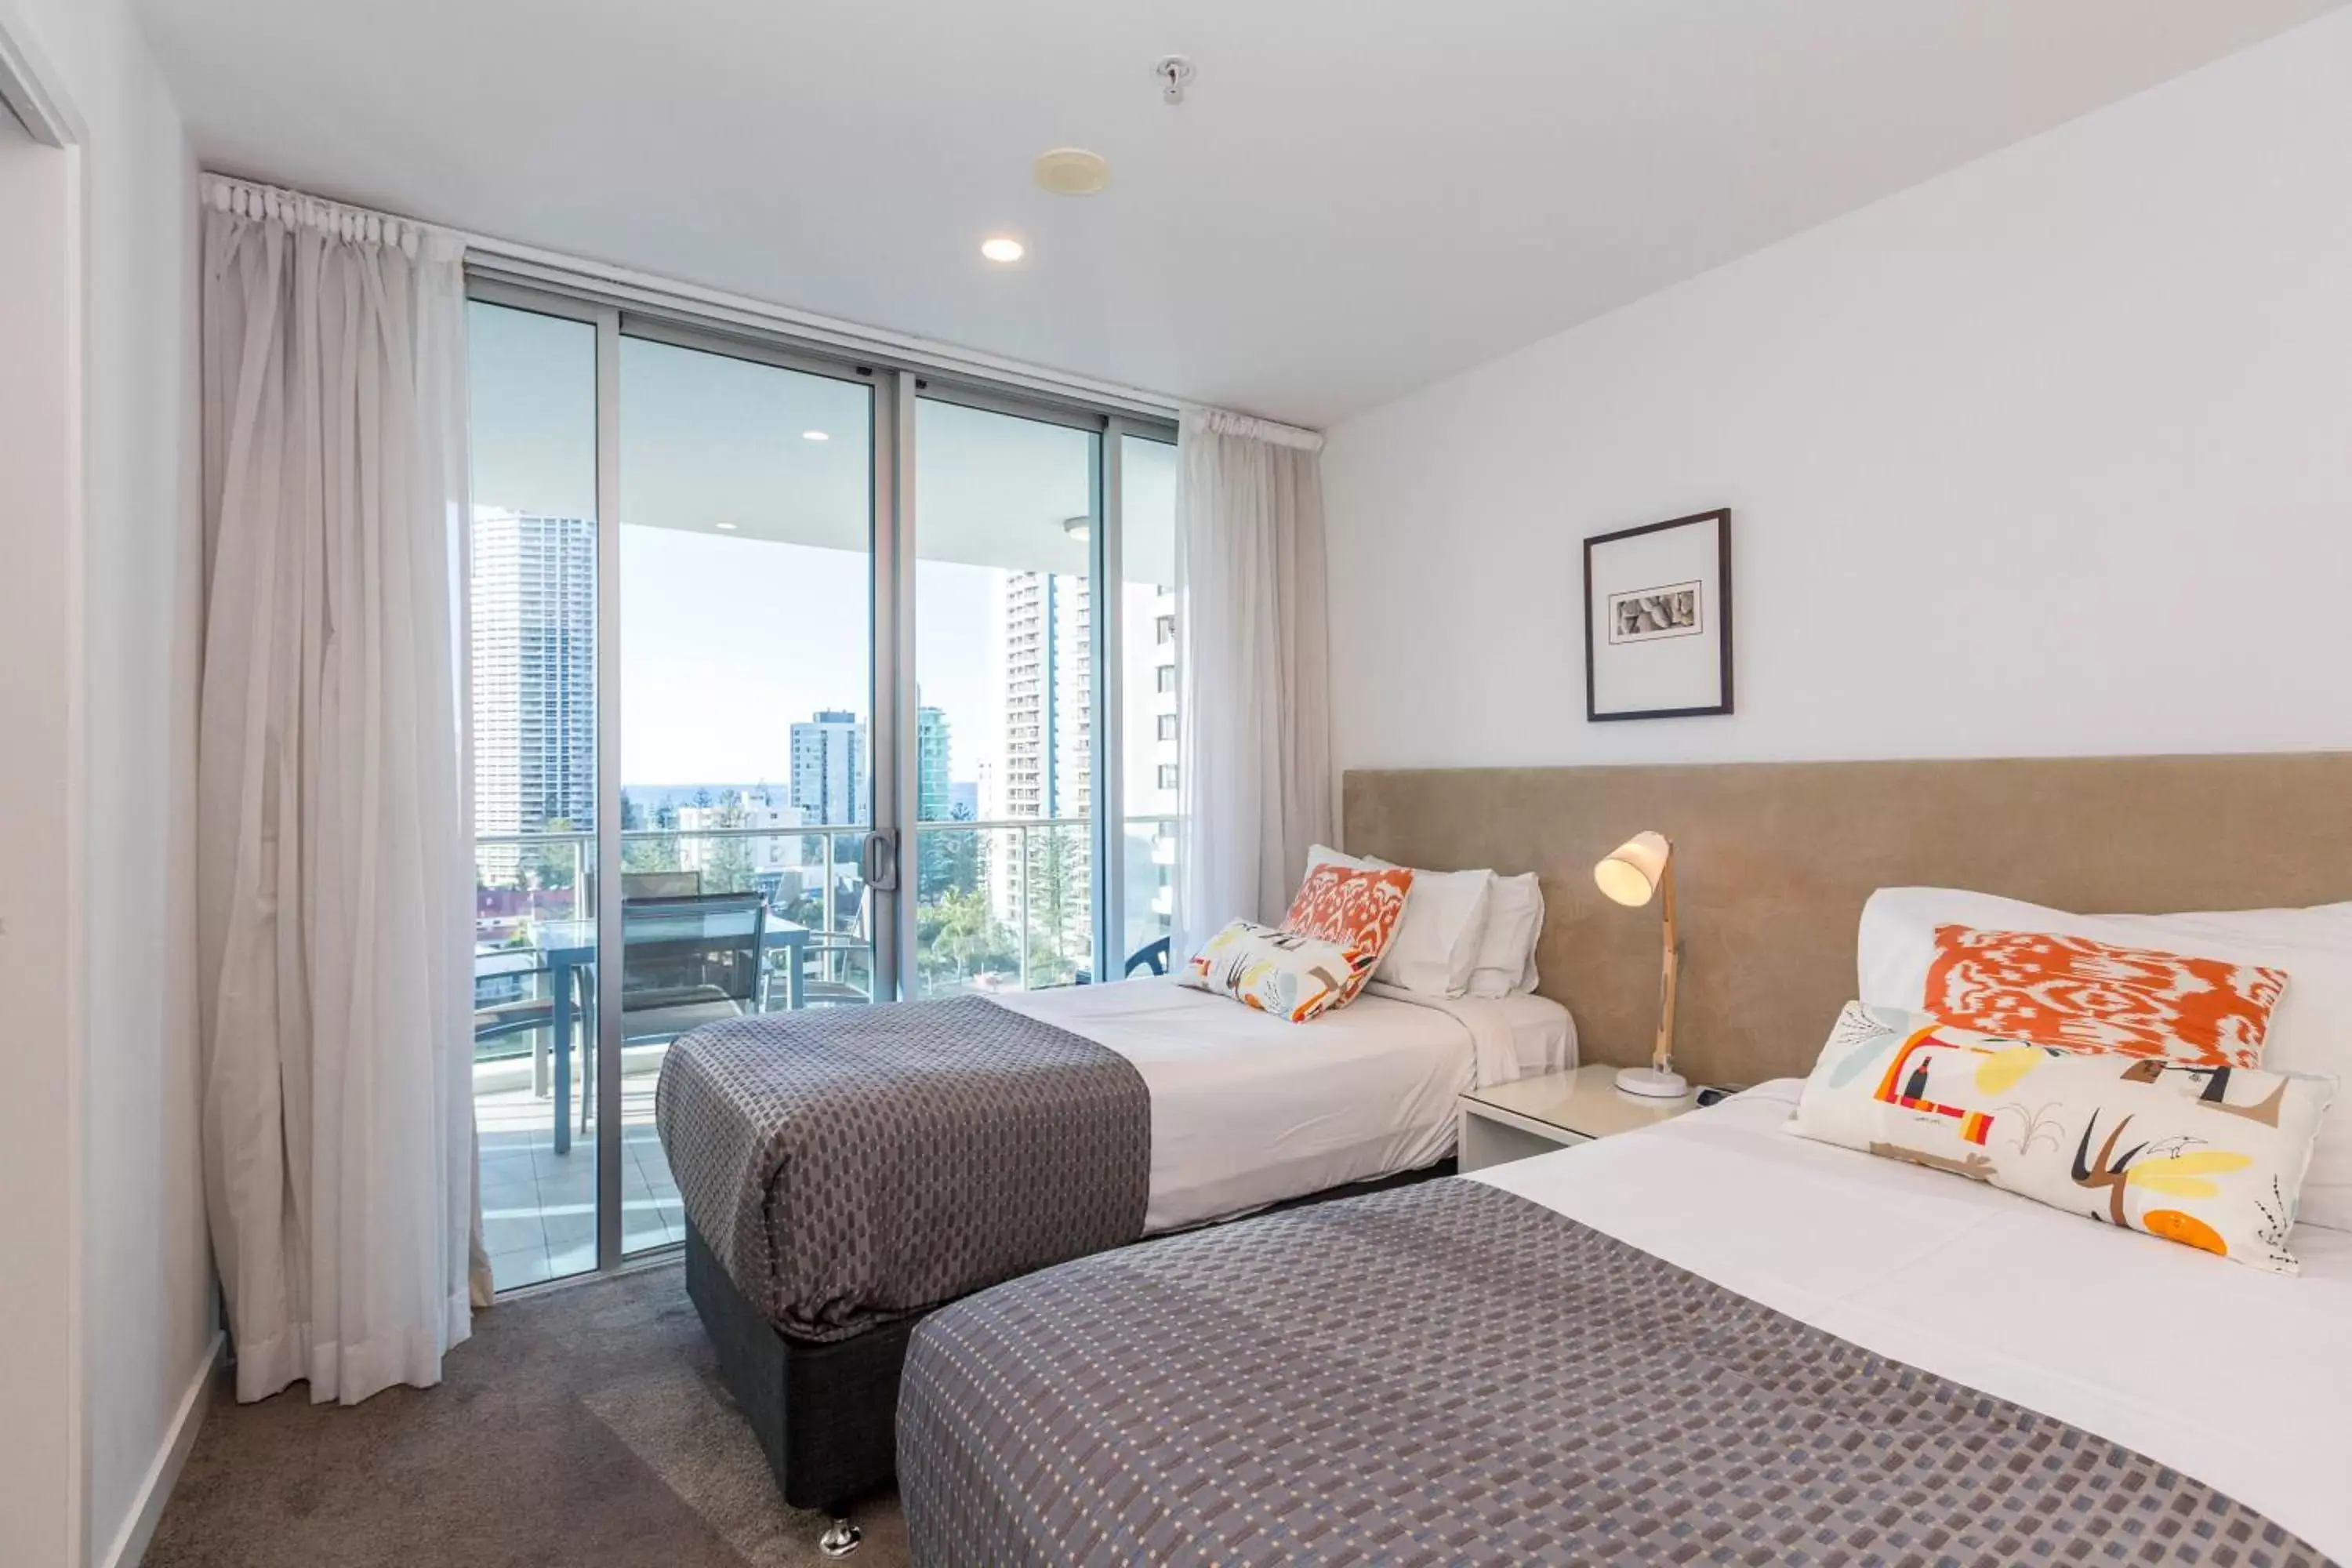 Bedroom, Room Photo in Artique Surfers Paradise - Official